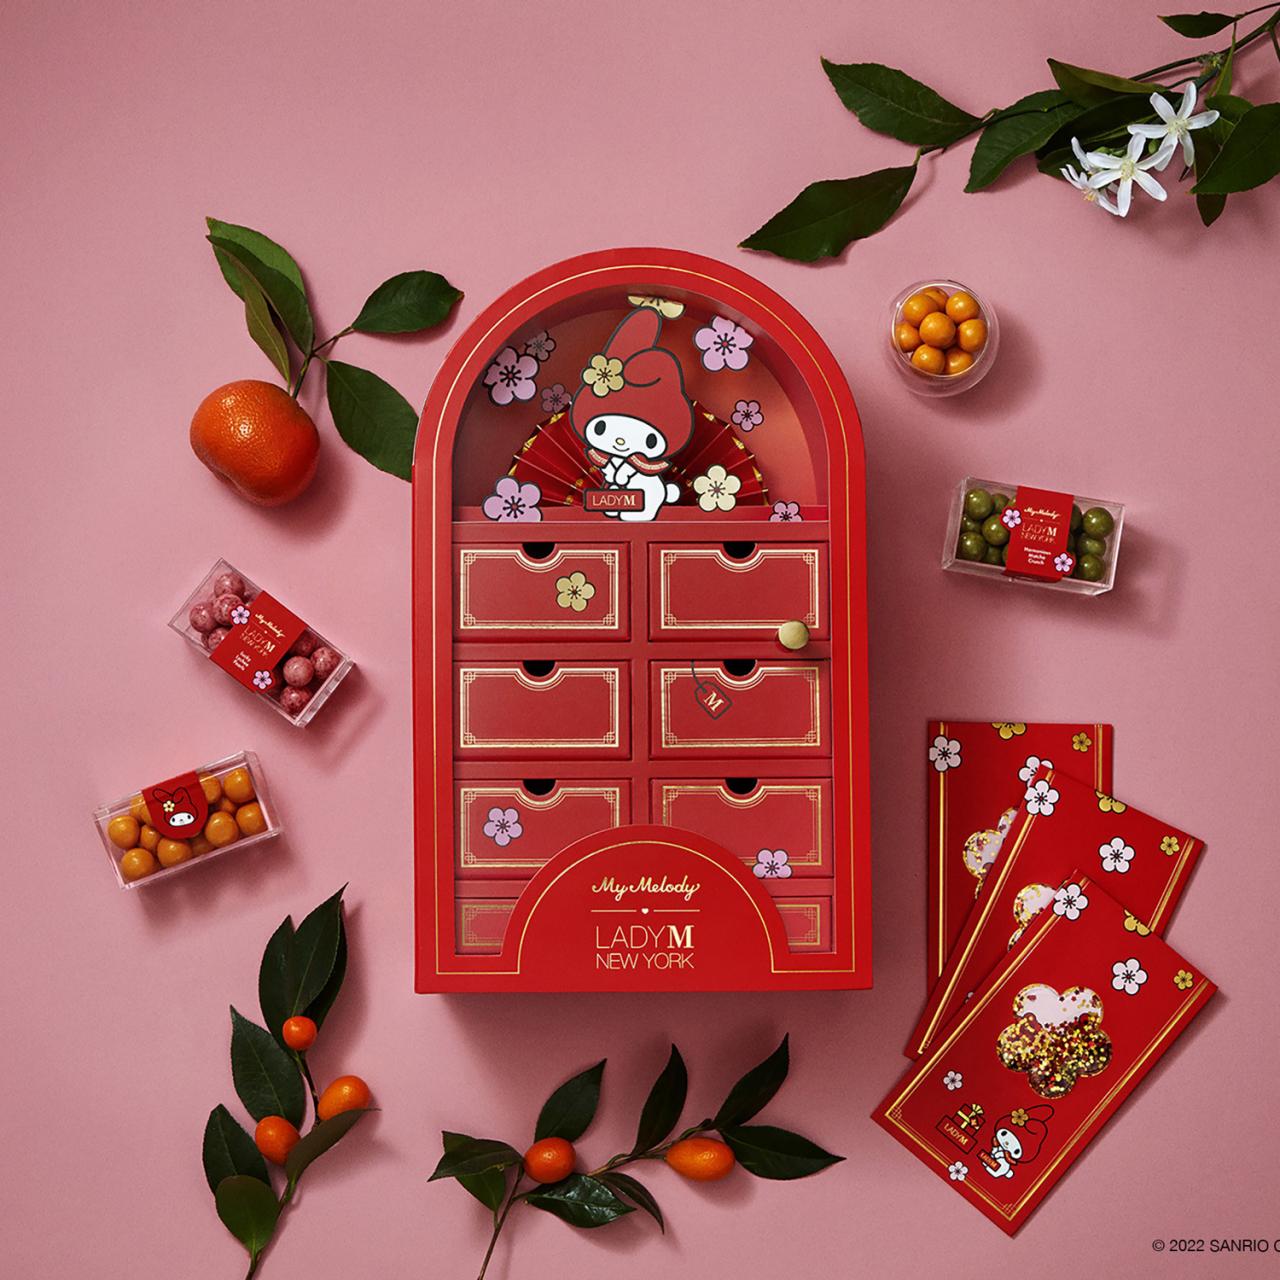 9 Best Lunar New Year Decorations for Good Luck 2023